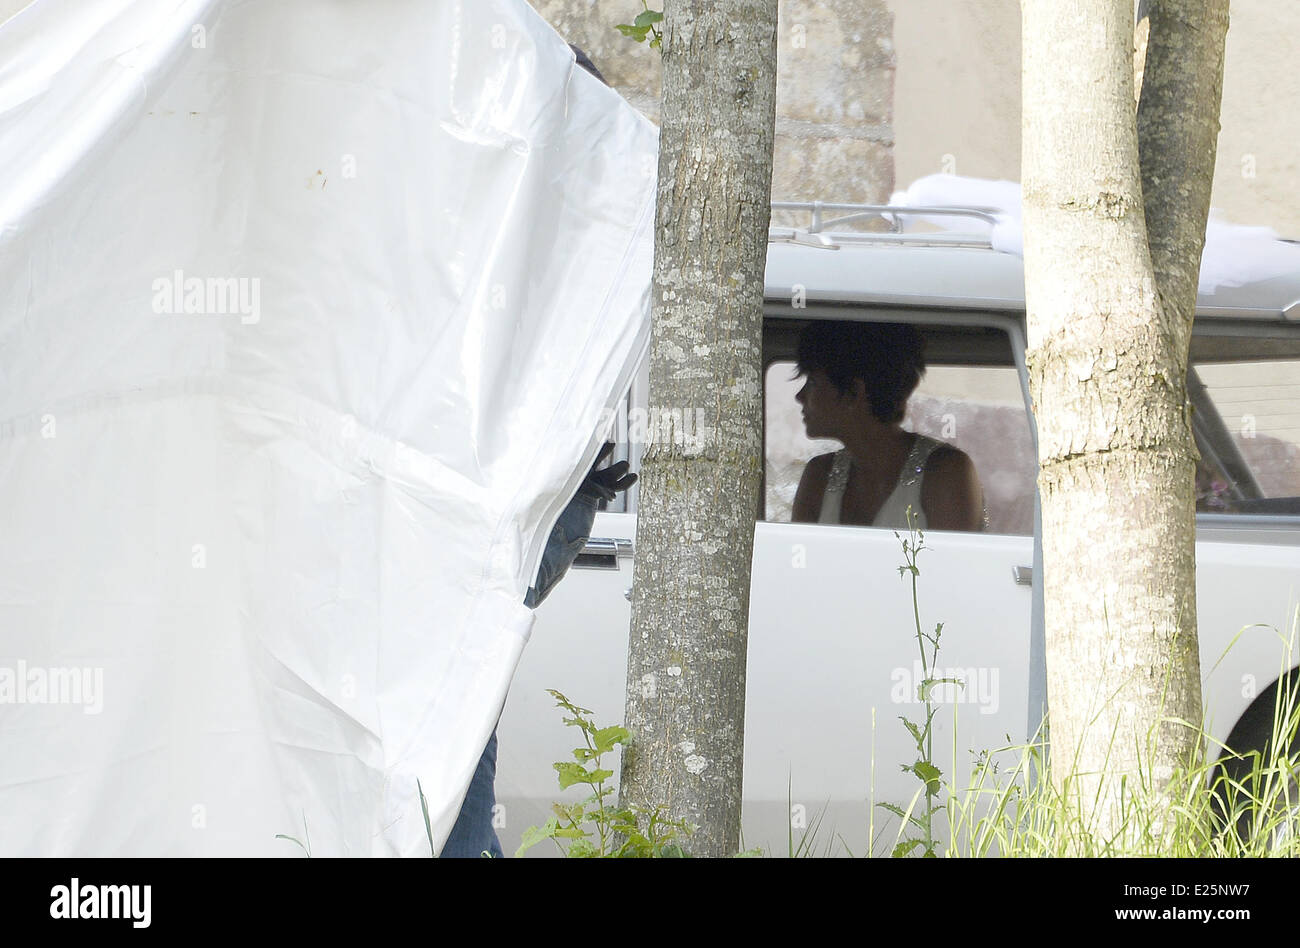 The wedding of Halle Berry and Olivier Martinez at Chateau des Conde in Vallery    HALLE BERRY AND OLIVIER MARTINEZ WED IN FRAN Stock Photo